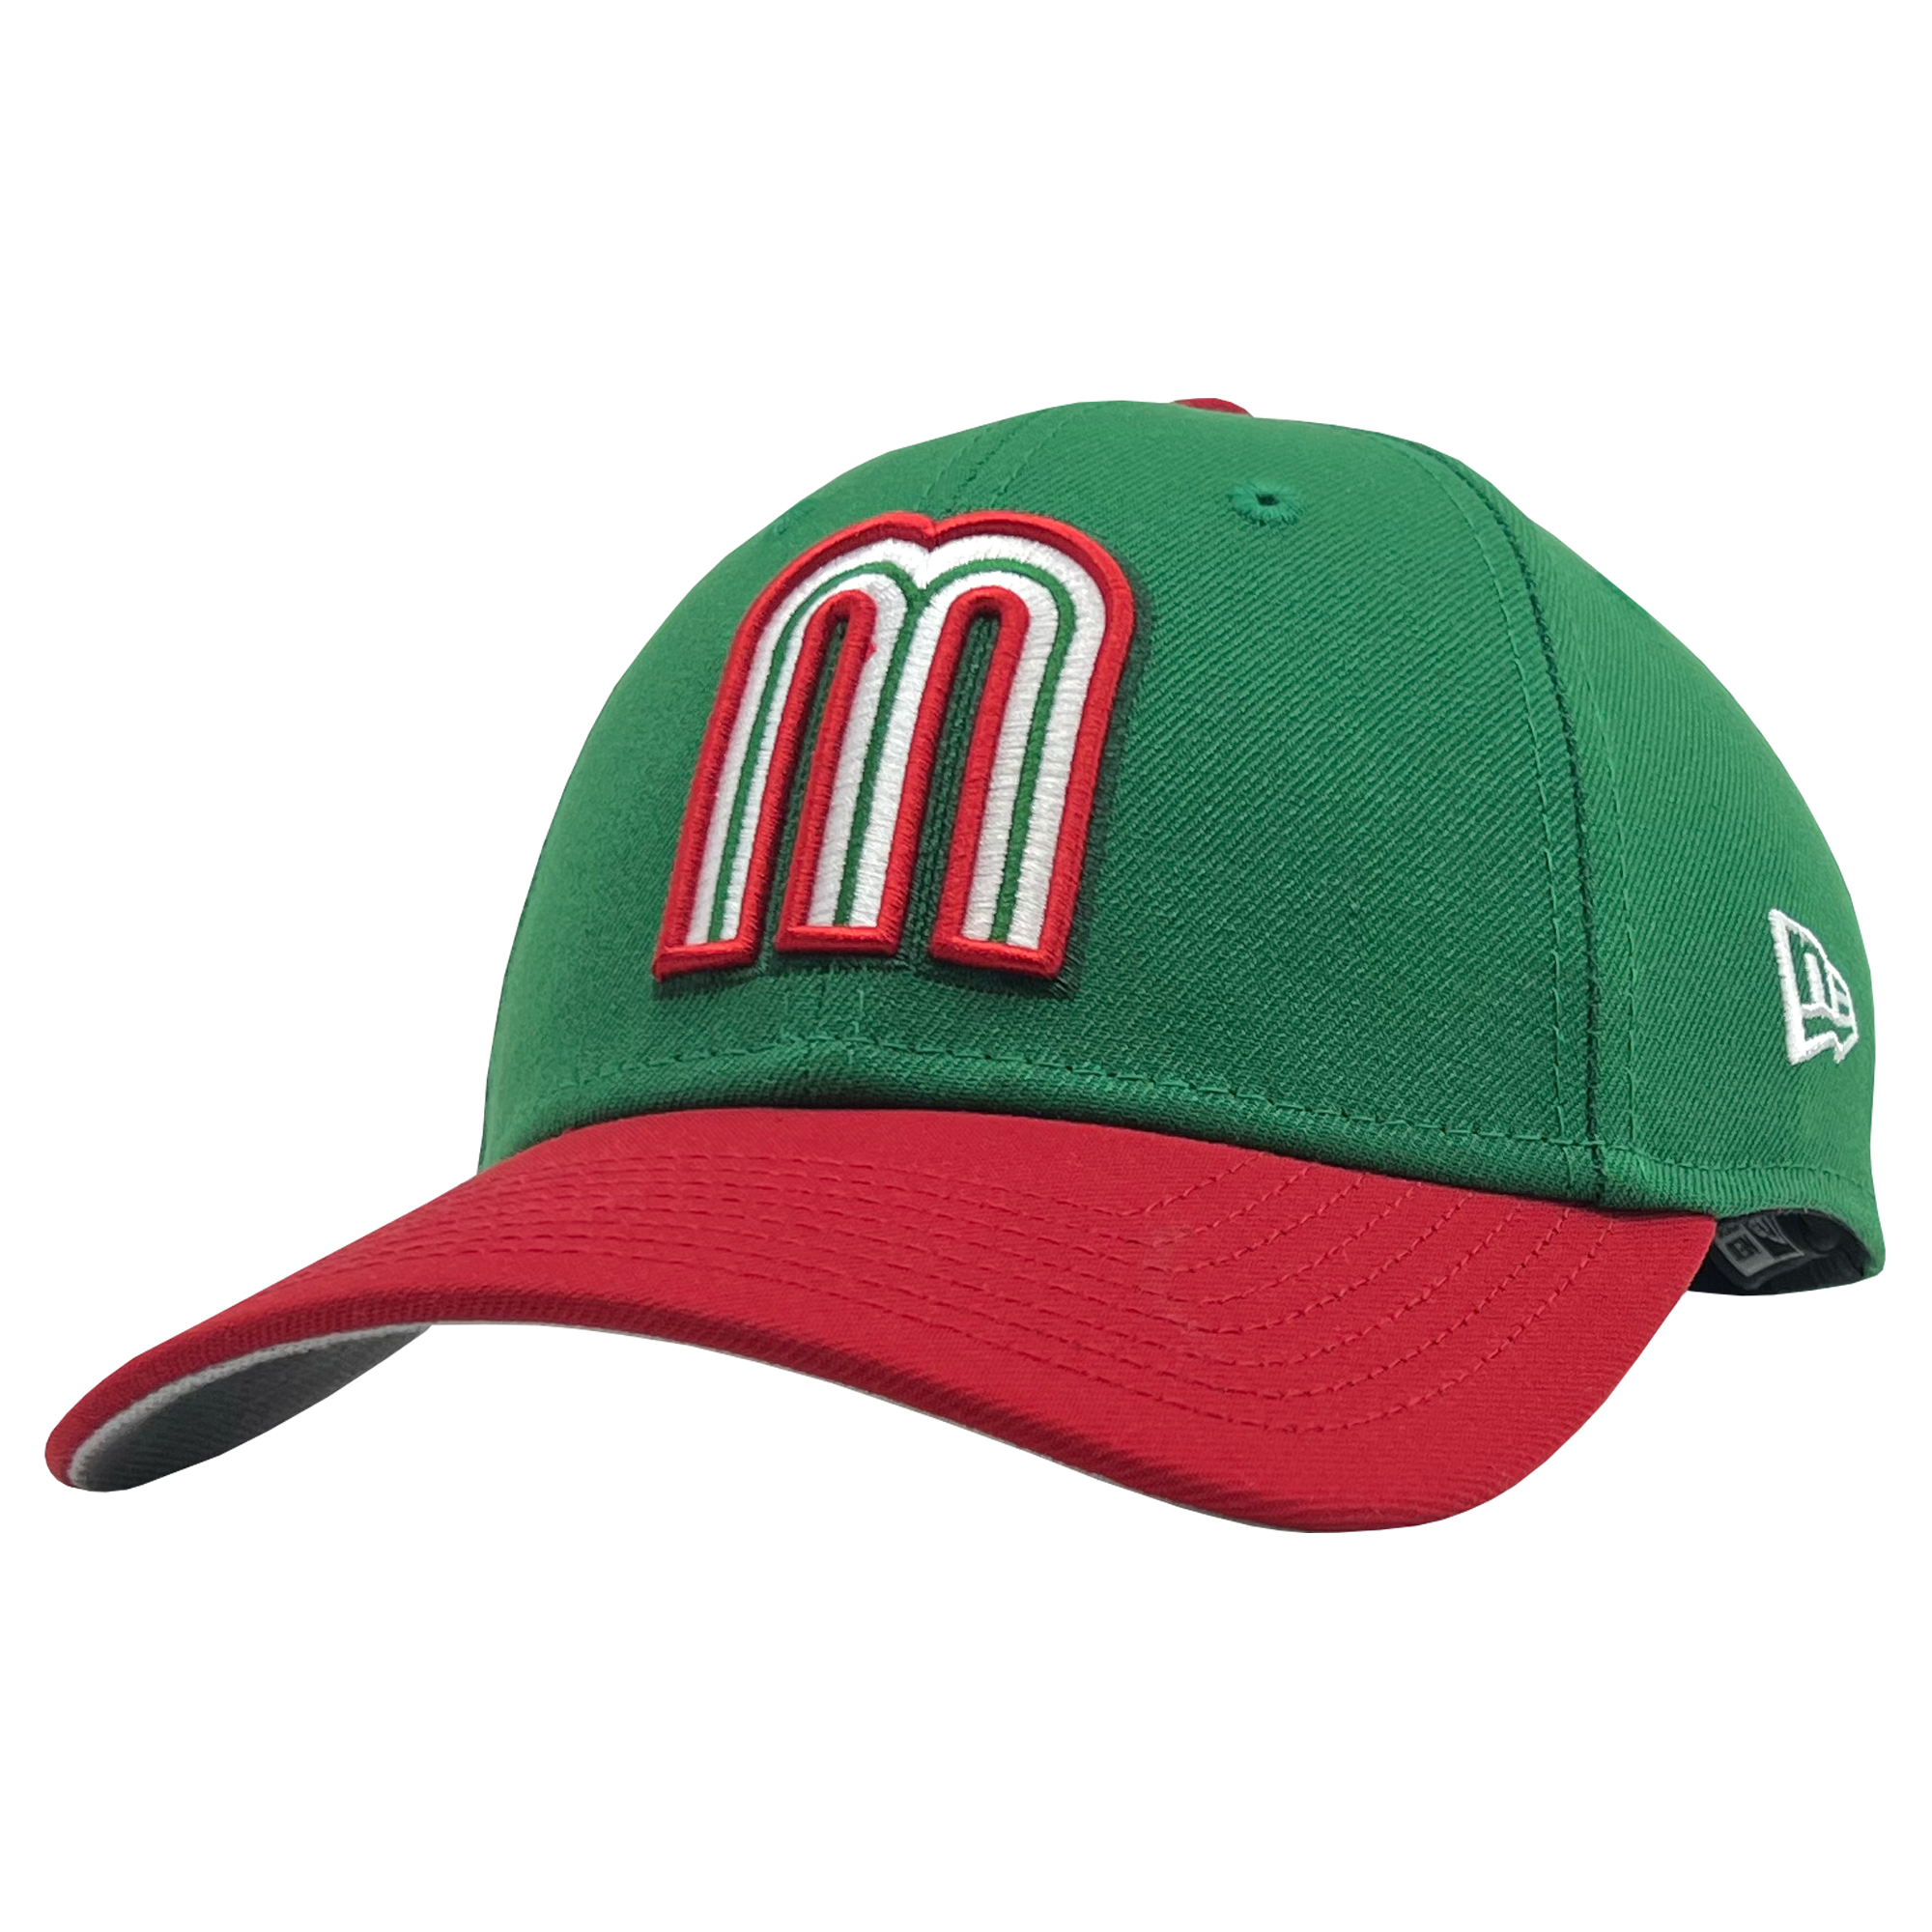 Side angle green New Era adjustable cap with red and white Mexican baseball M patch, red bill, and embroidered New Era logo.